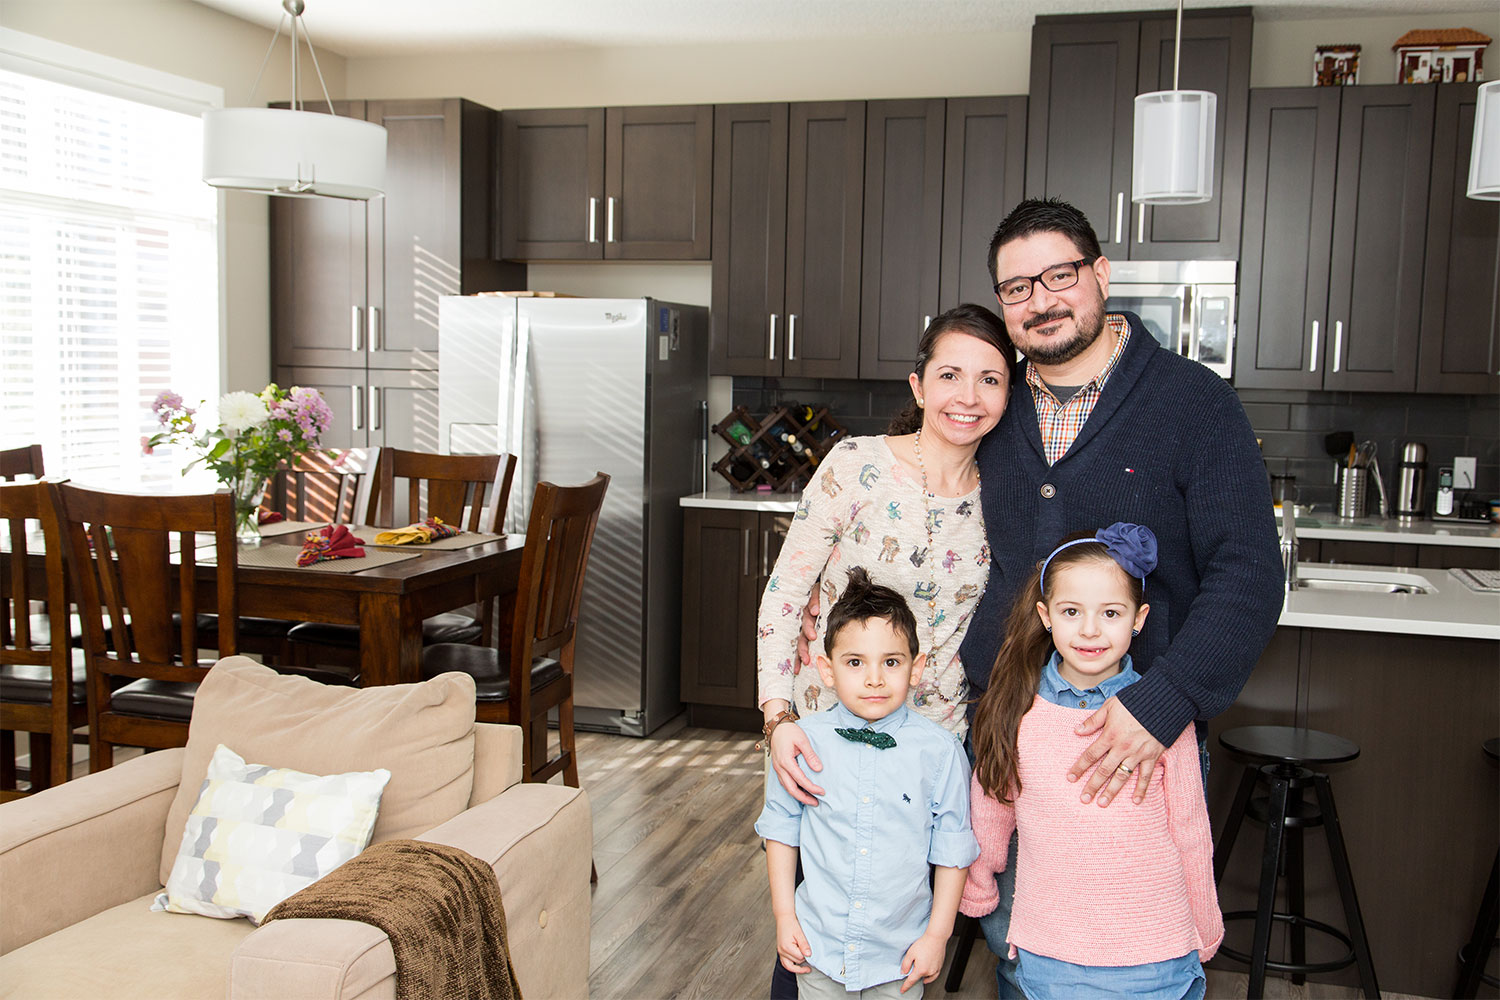 Isabel Echavarria and Andres Gutierrez, together with their children Santi and Sophia, say owning a home gives them a sense of belonging. 